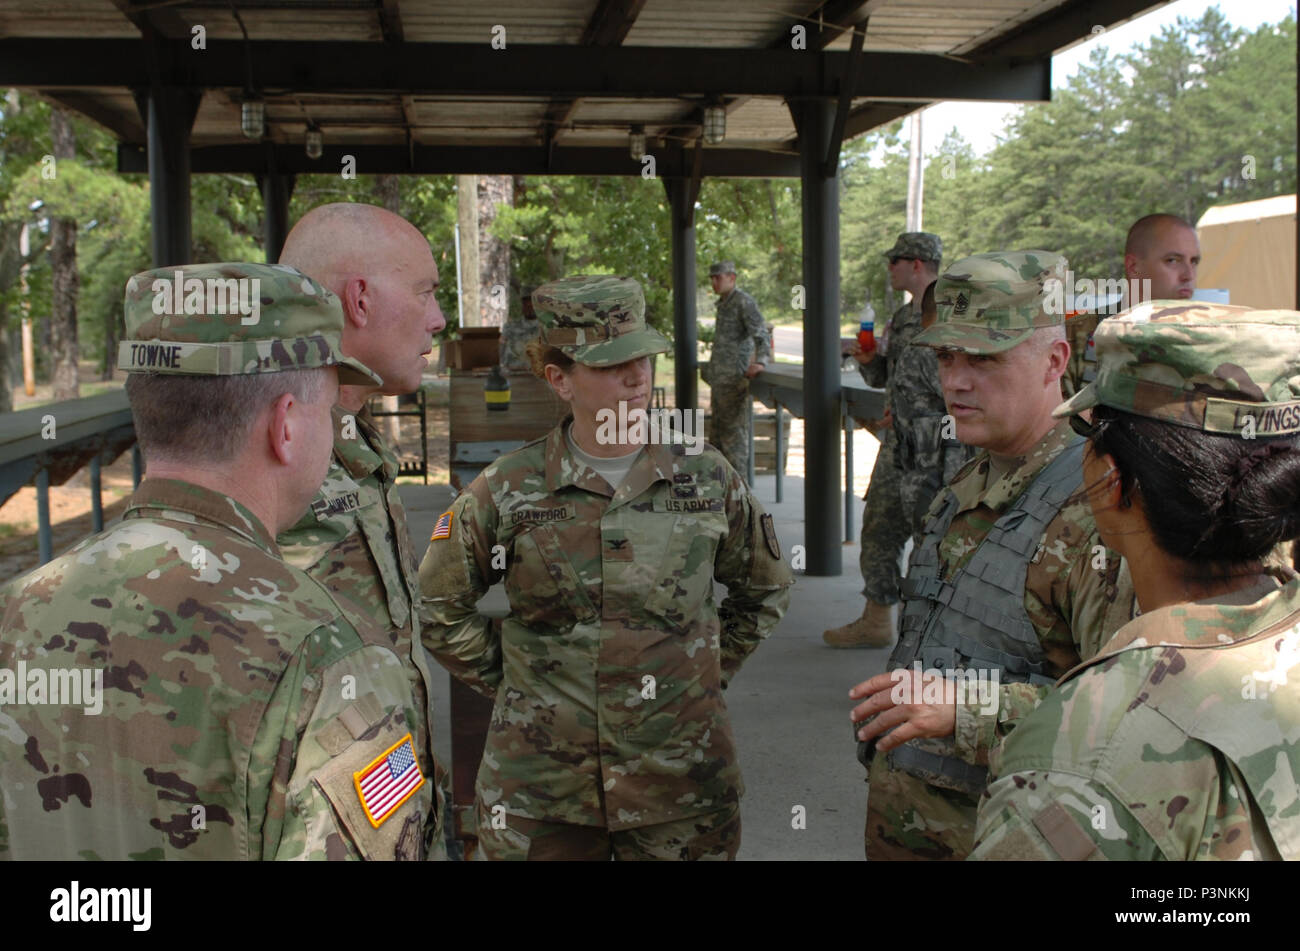 Sgt. Maj. Todd Syvrud (right), the top noncommissioned officer of the Army Reserve’s 154th Legal Operations Detachment headquartered in Alexandria, Virginia, discusses training strategies for his organization conducting range qualifications on U.S. Army Support Activity, Fort Dix ranges with Lieutenant General Charles D. Luckey, chief of Army Reserve and commanding general, U.S. Army Reserve Command, at Joint Base McGuire-Dix-Lakehurst, New Jersey, during a training-capabilities update July 14-15. Standing next to the unit's top NCO is Col. Michelle Crawford, the detachment commander. Stock Photo